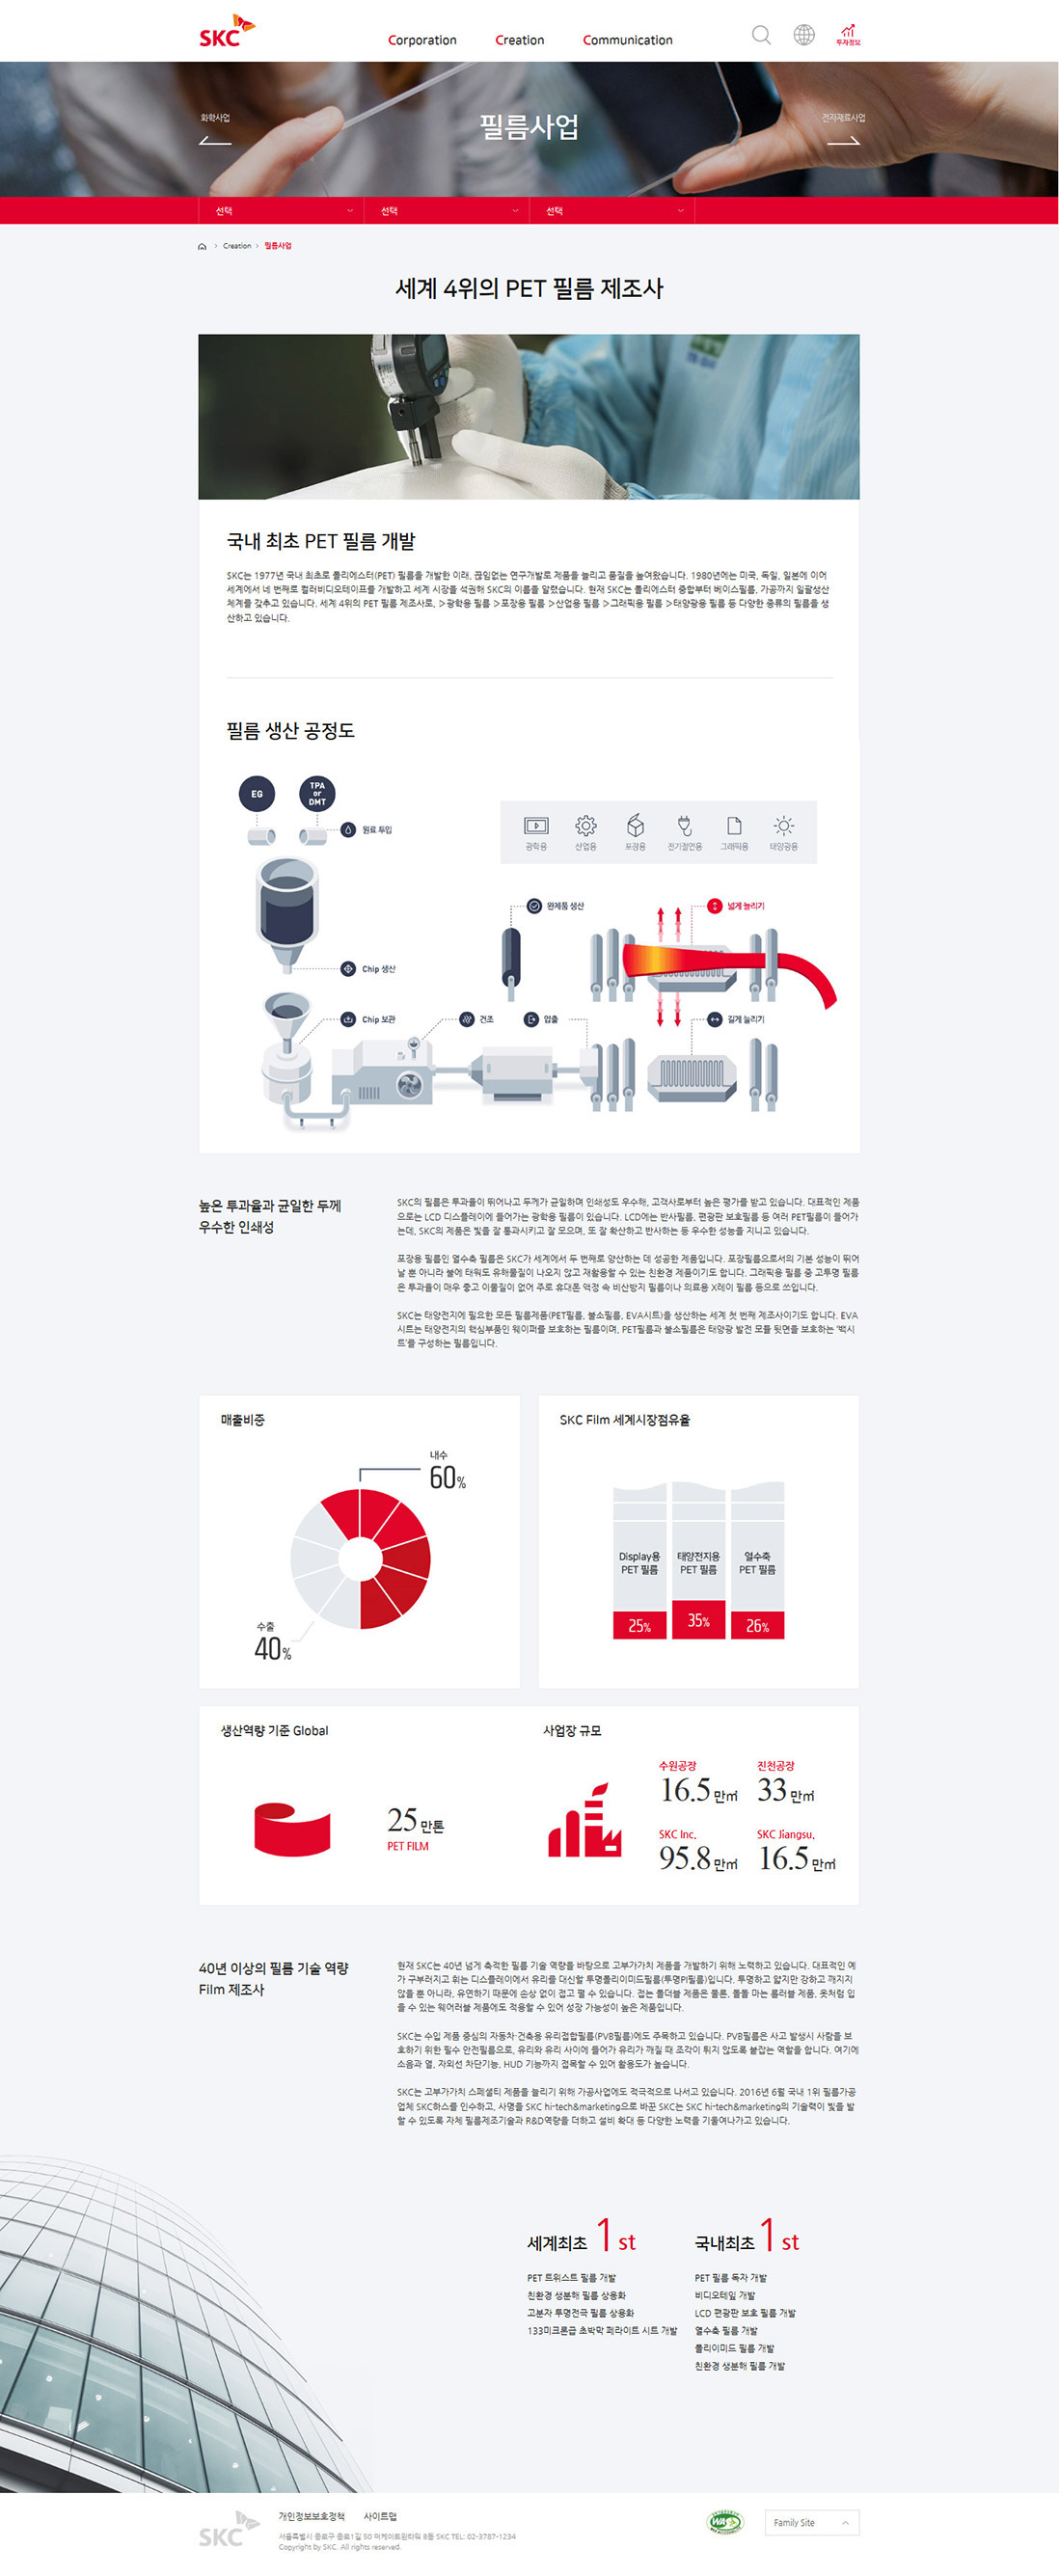 flat design flat graphic infographic process manufacture chemical plastic